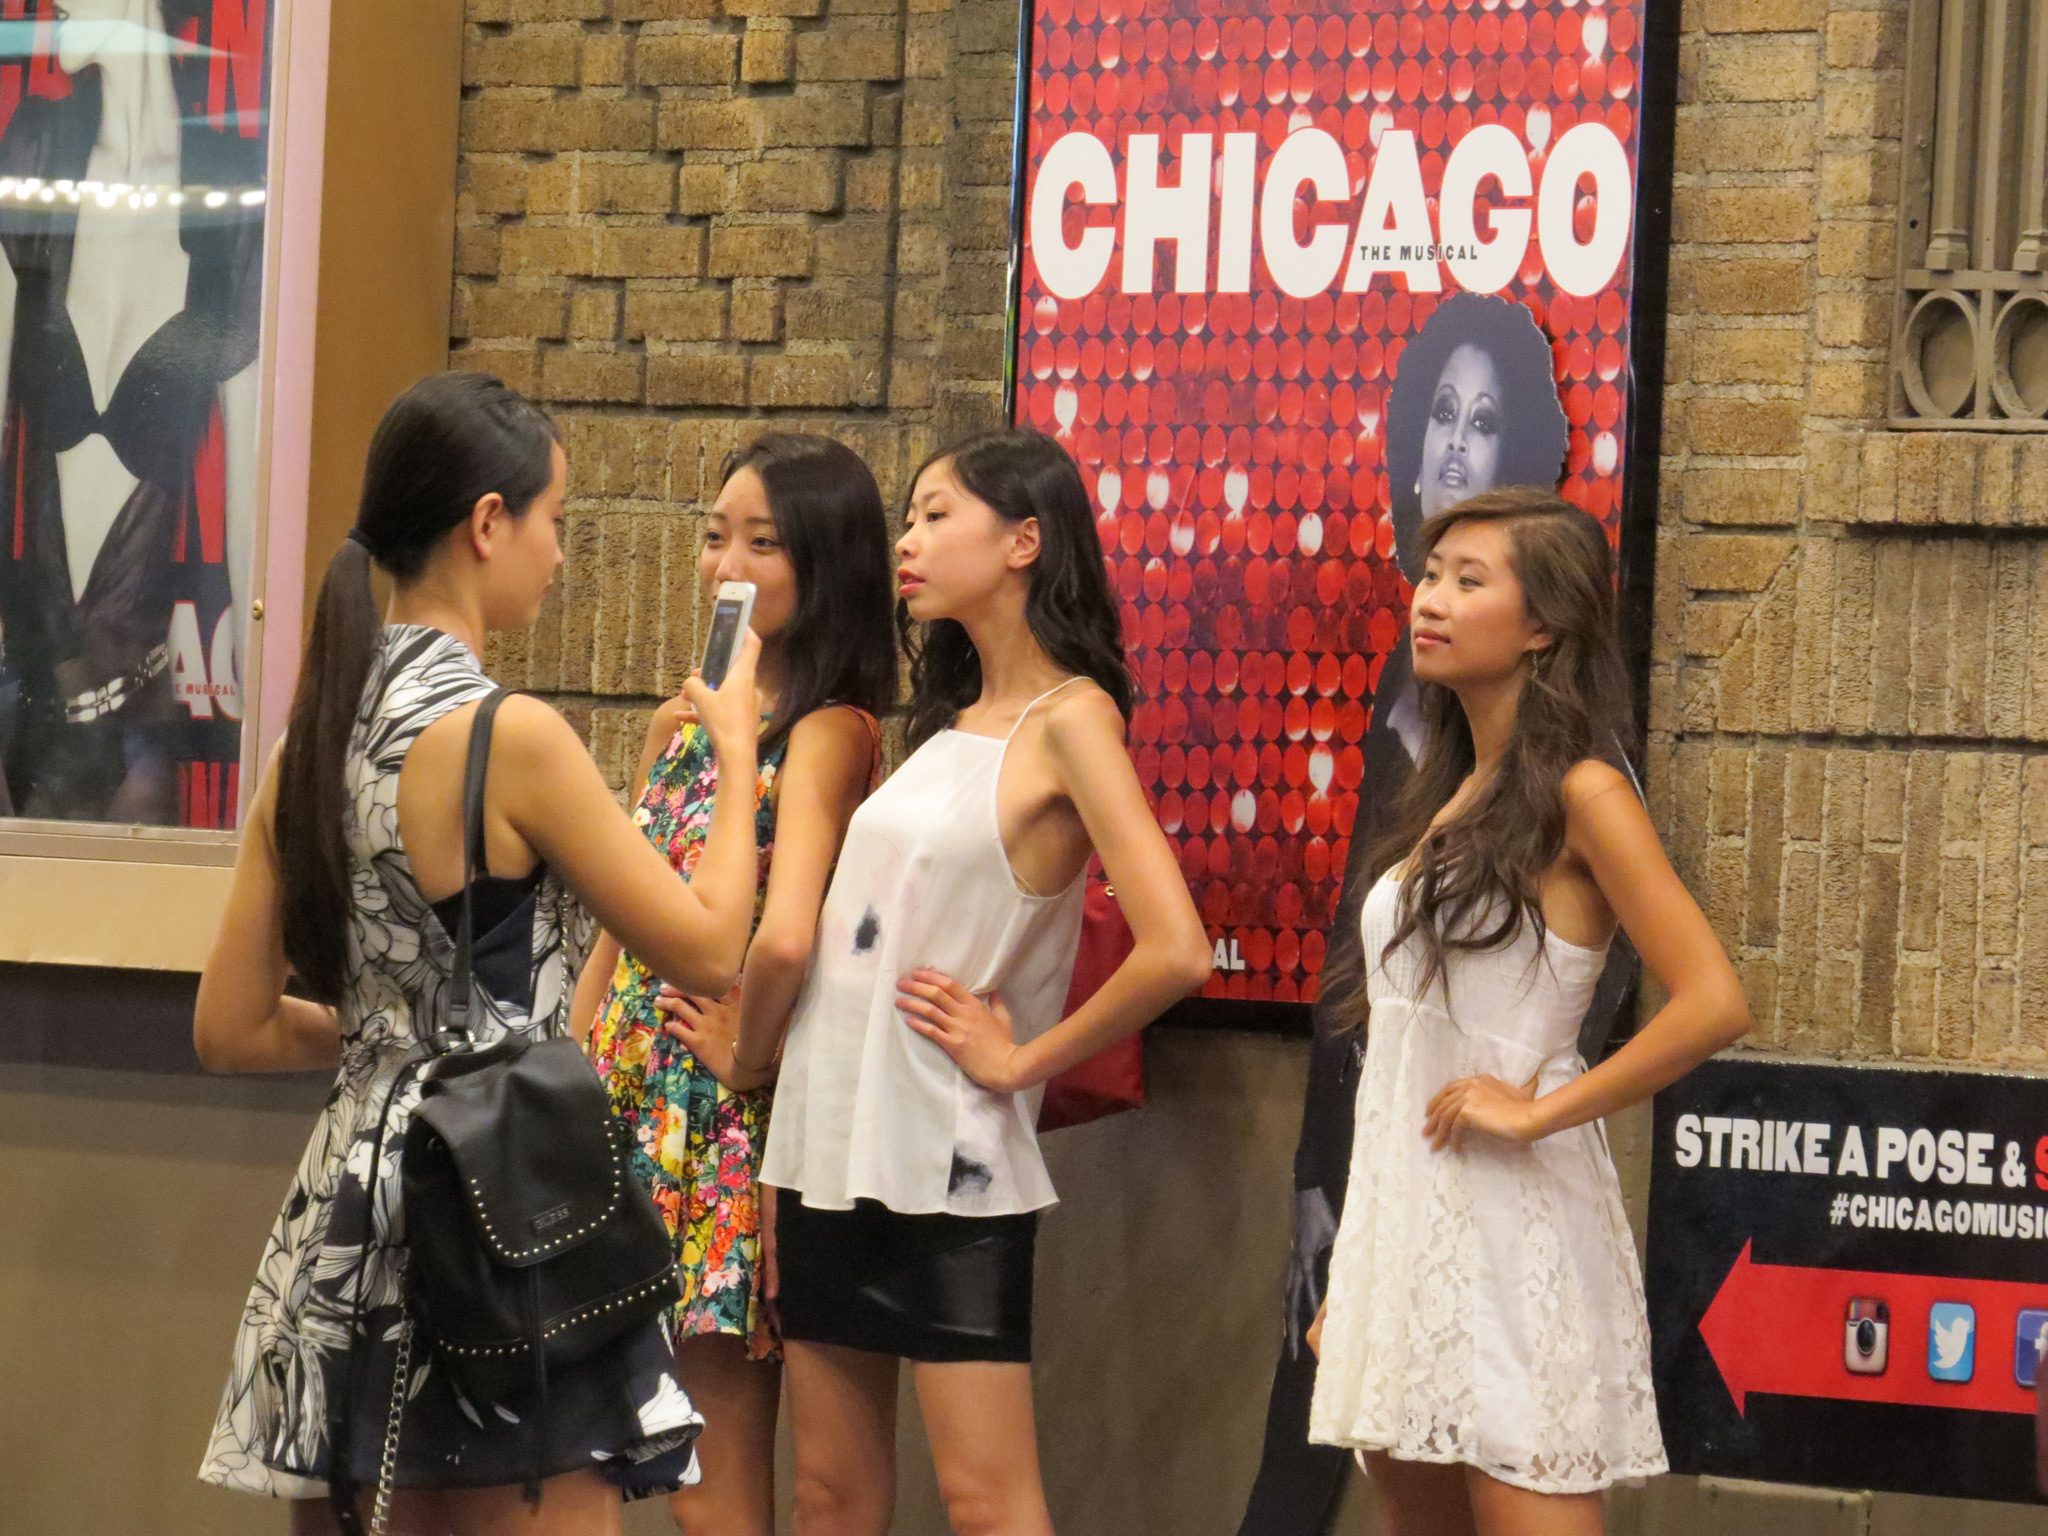 Chicago on Broadway: Girls Outside Theatre